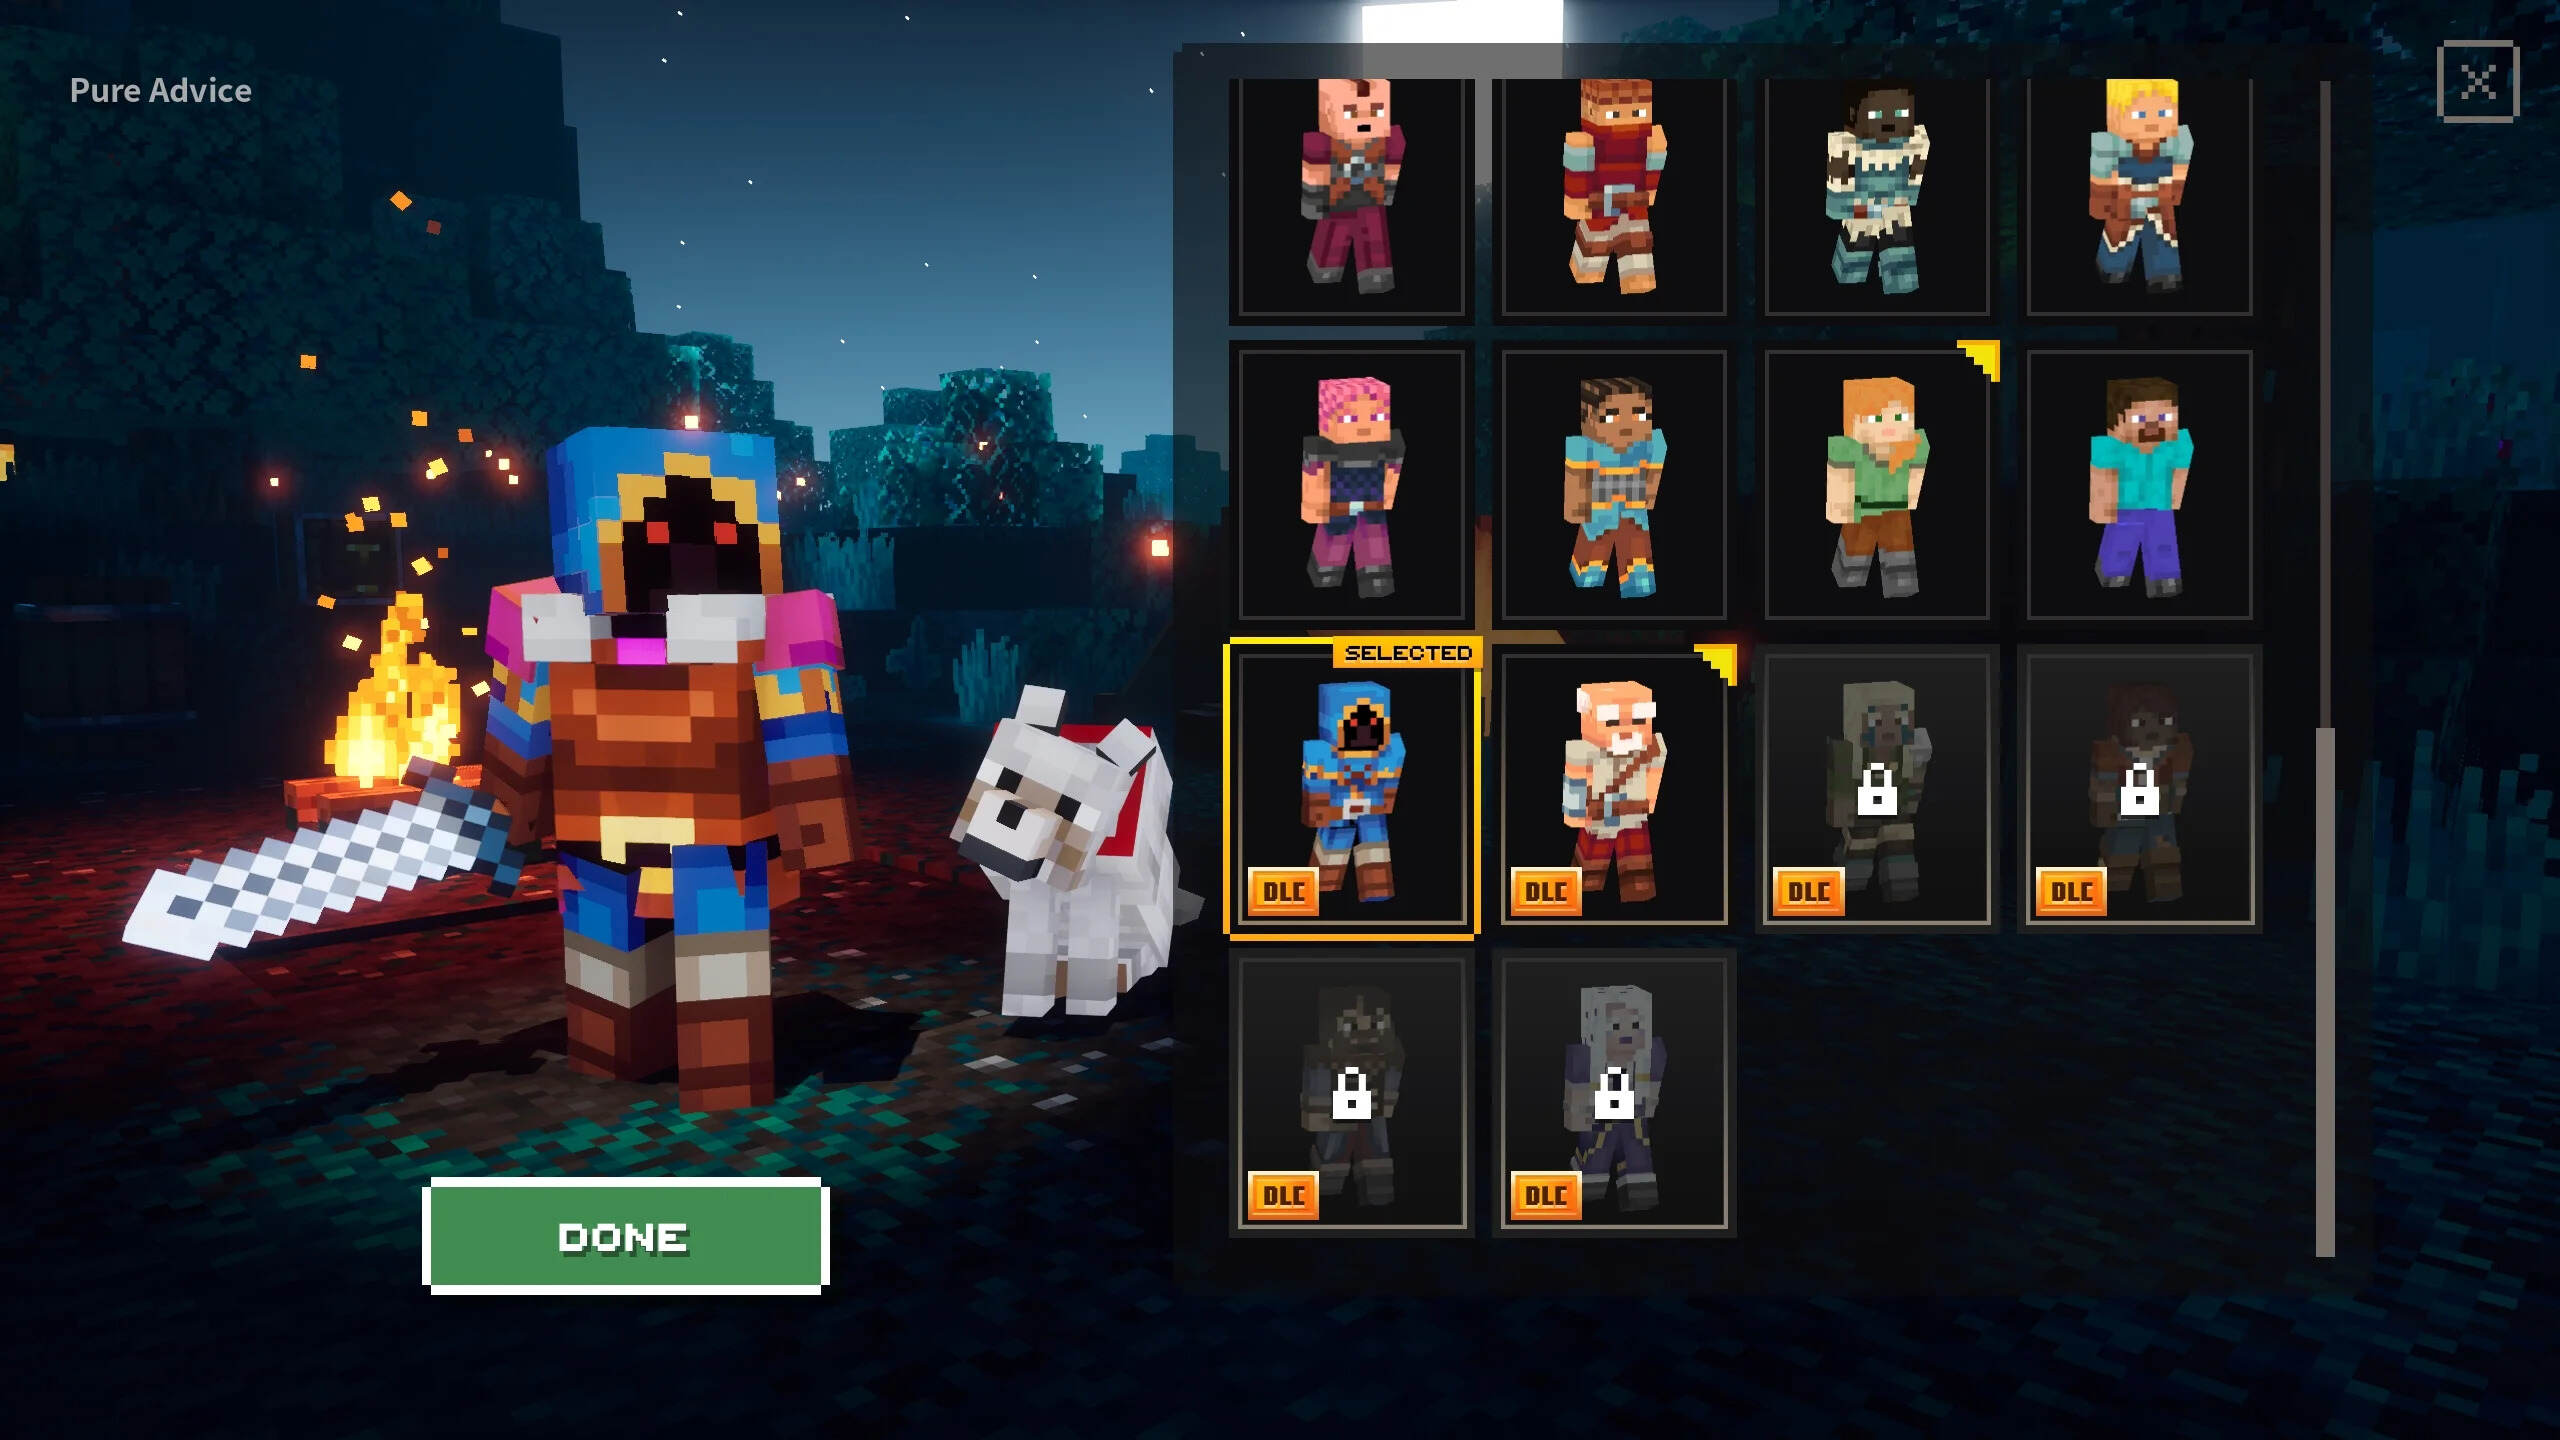 How To Download Minecraft Skins On Mobile